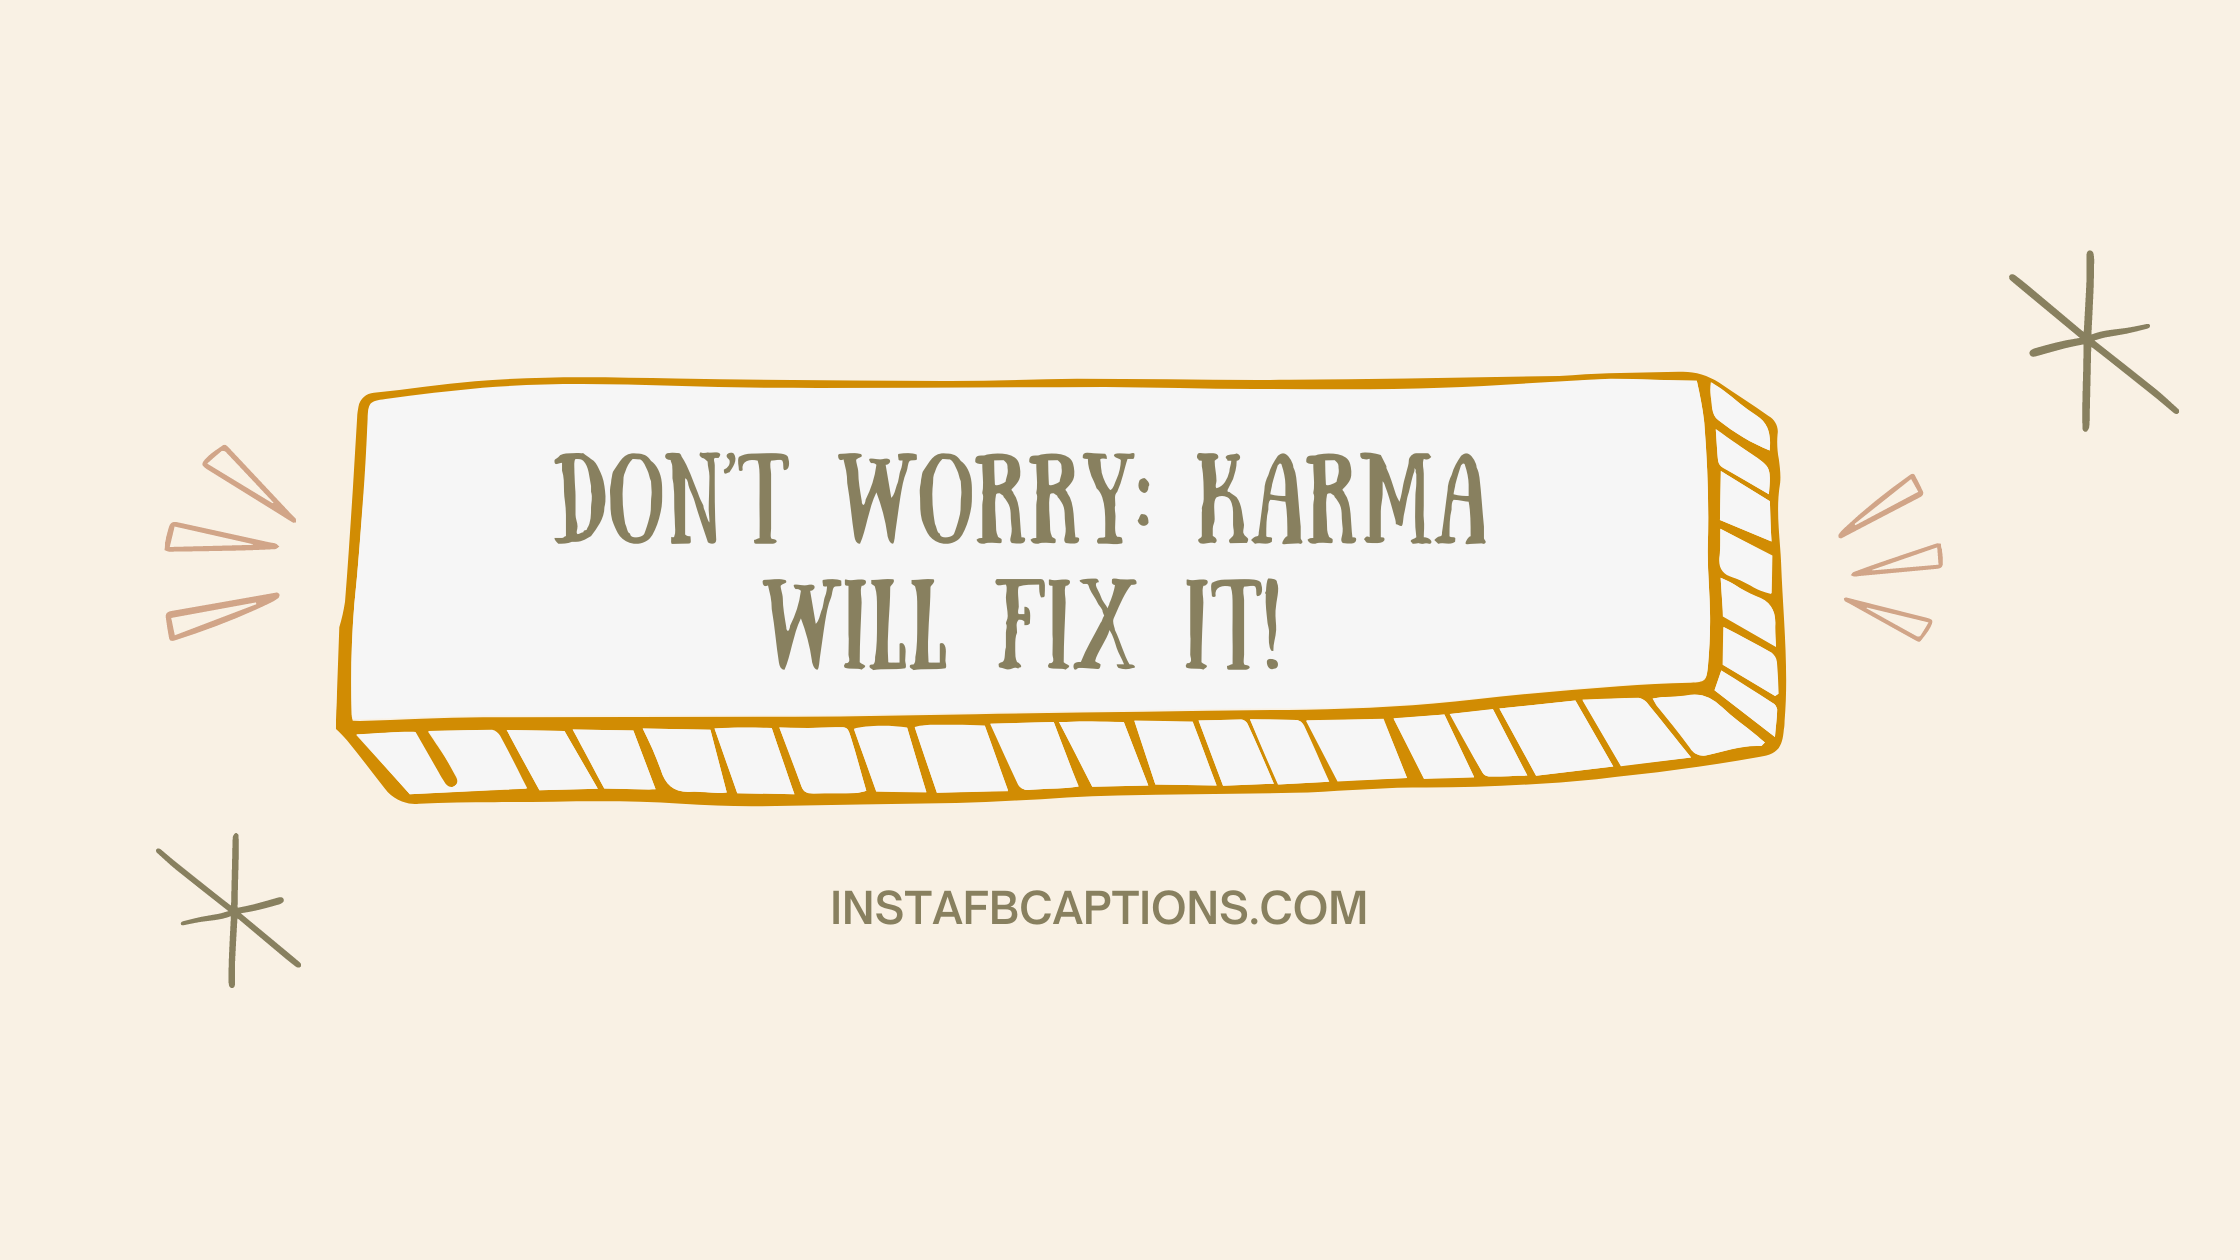 Karma Believer Quotes  - Karma Believer Quotes  - Karma Vibes: Captions and Quotes for Instagram in 2023